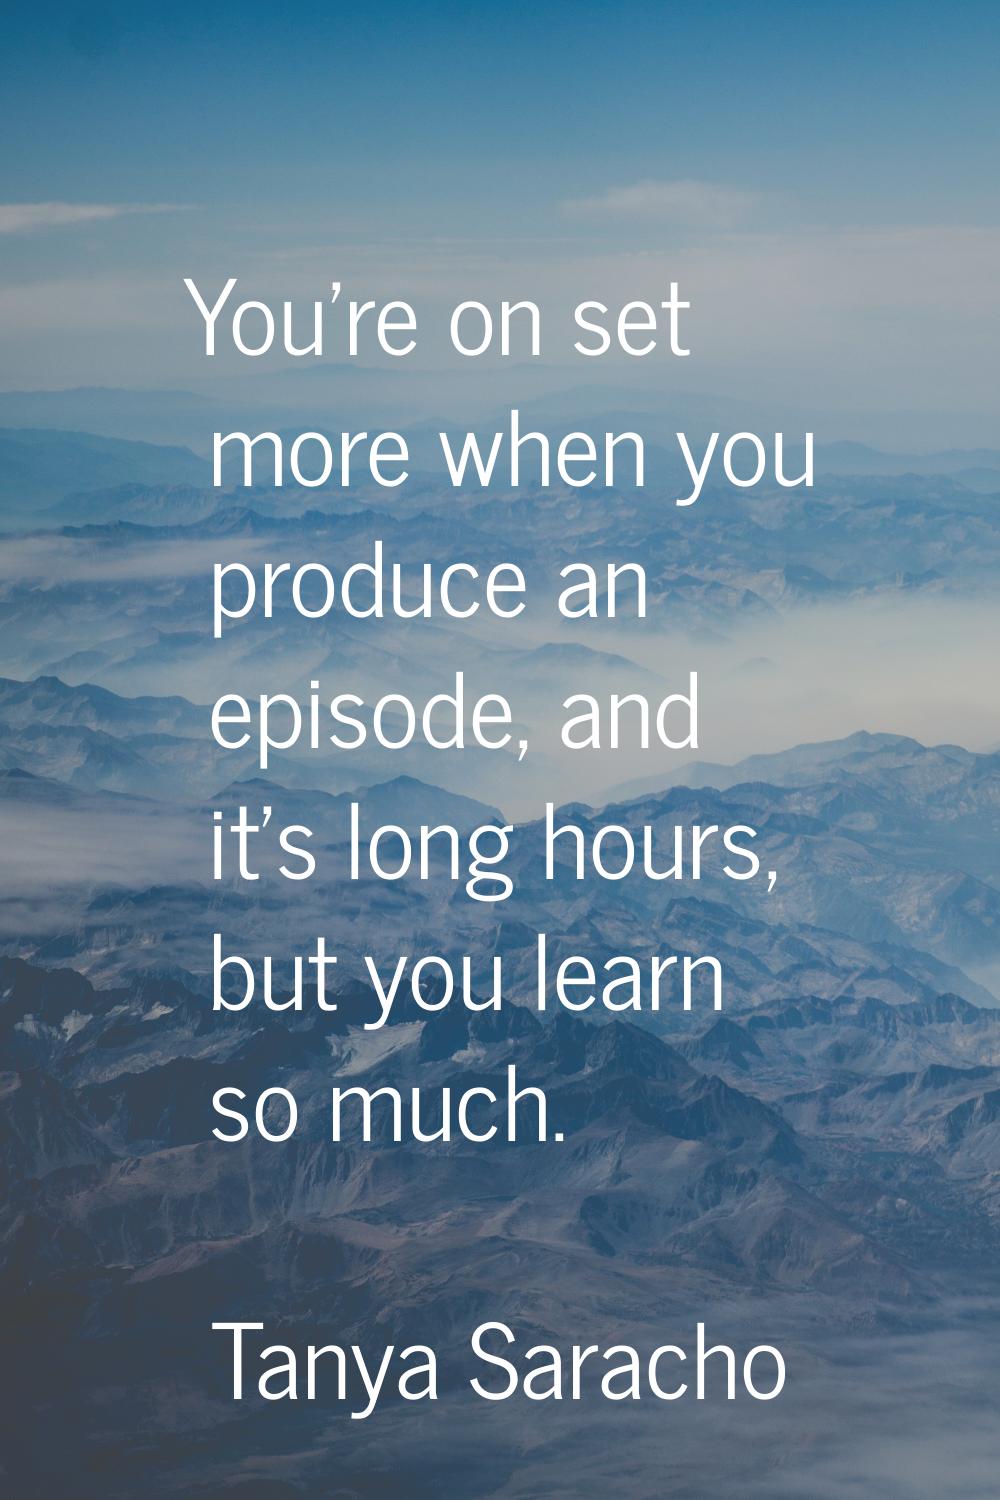 You're on set more when you produce an episode, and it's long hours, but you learn so much.